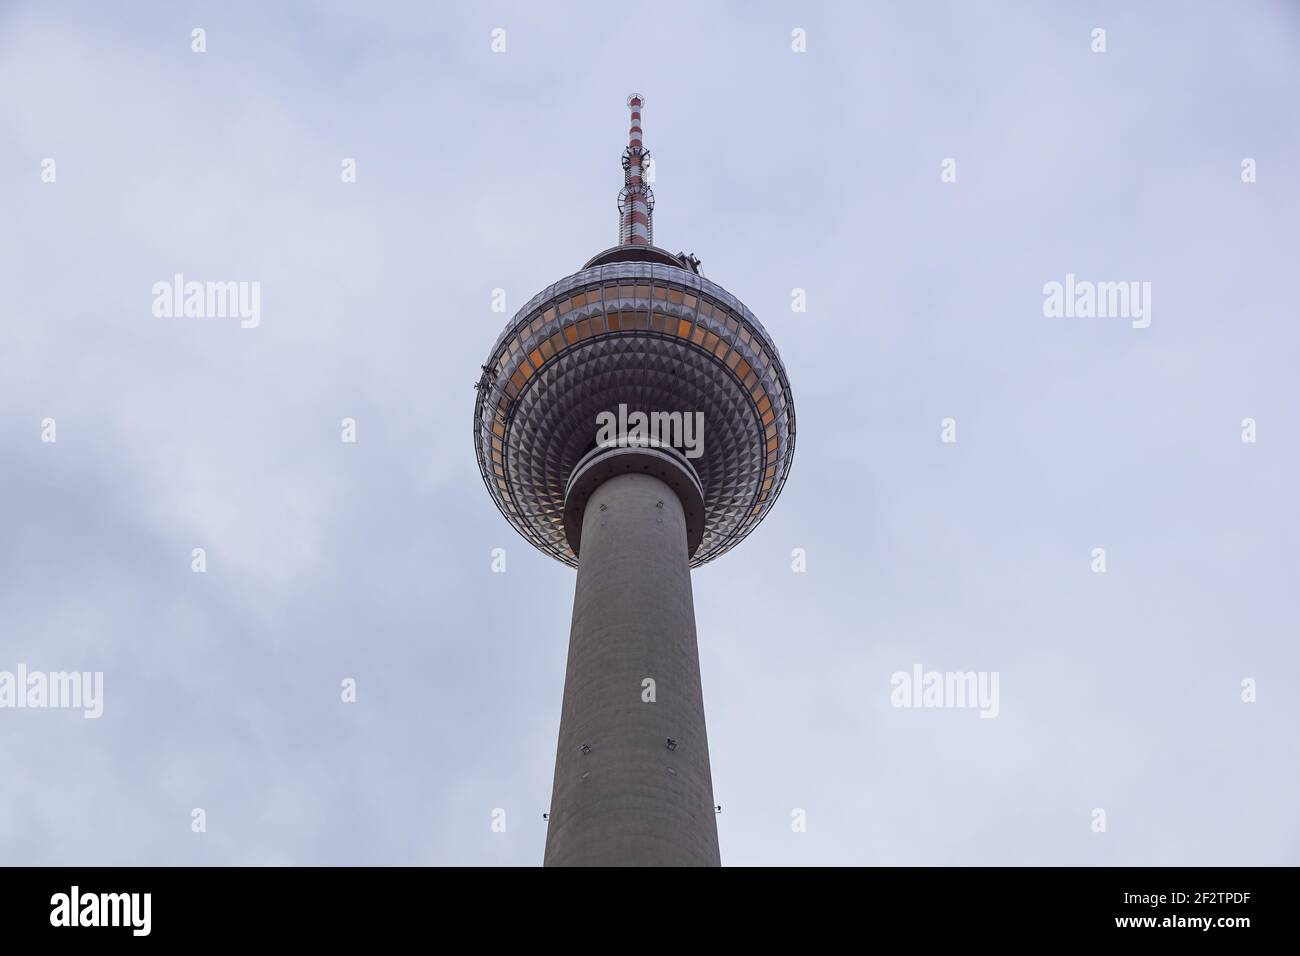 The TV Tower located on the Alexanderplatz in Berlin, Germany Stock Photo